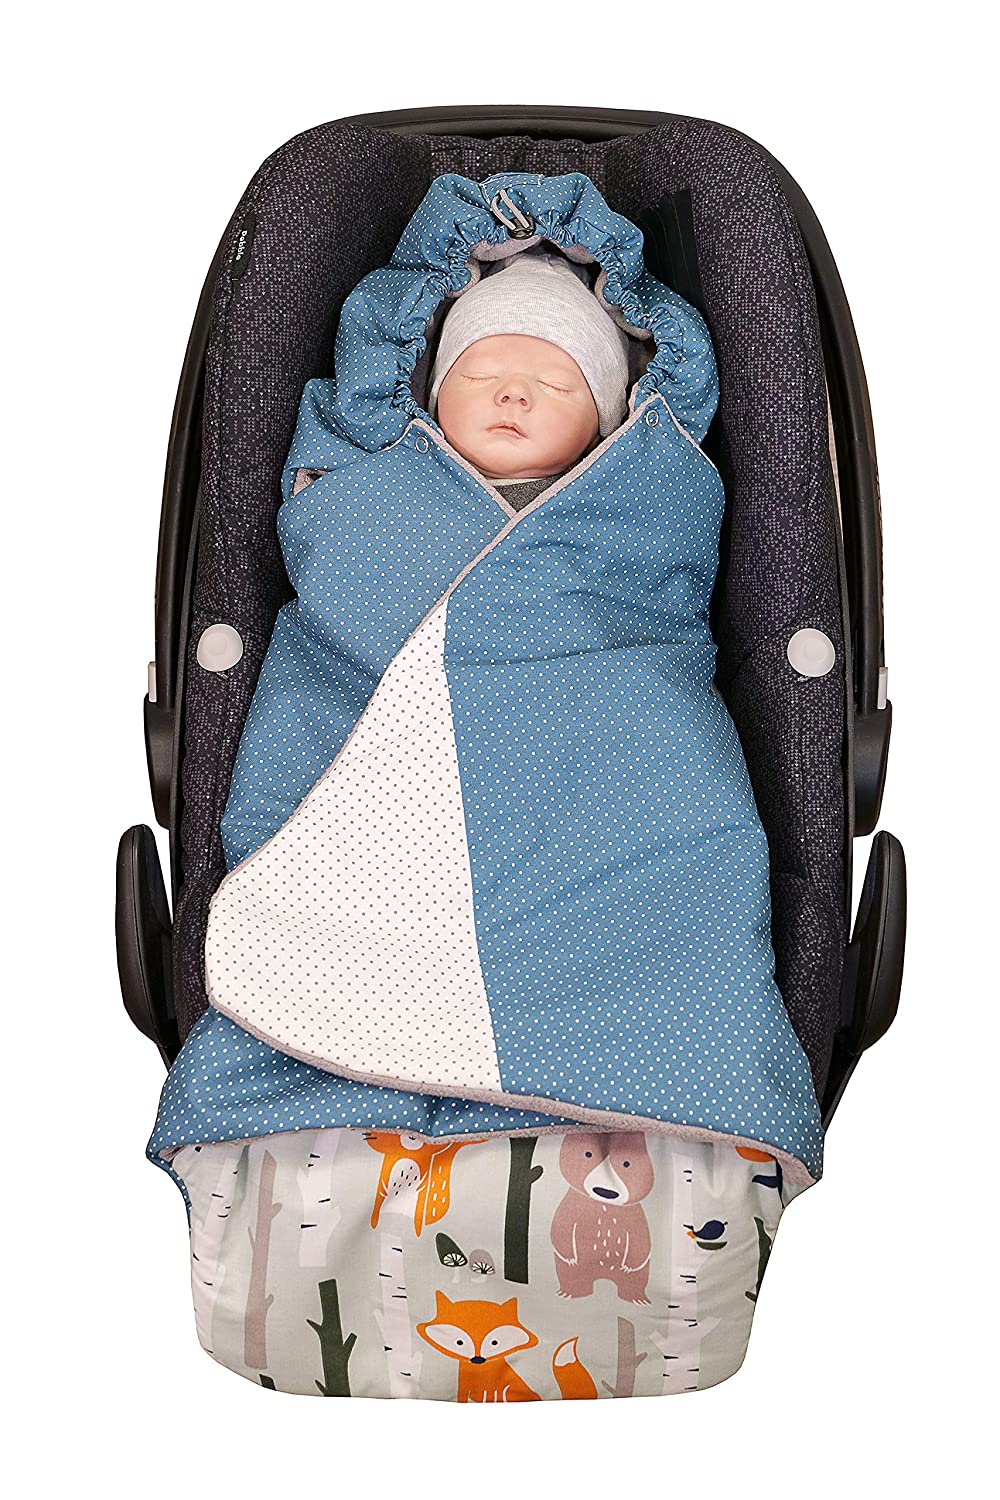 ULLENBOOM ® Baby Swaddling Blanket Summer Forest Animals Petrol (Made in EU) – Blanket for Baby Car Seat & Prams, Compatible with Maxi Cosi® Car Seat, Ideal for 0 to 9 Months